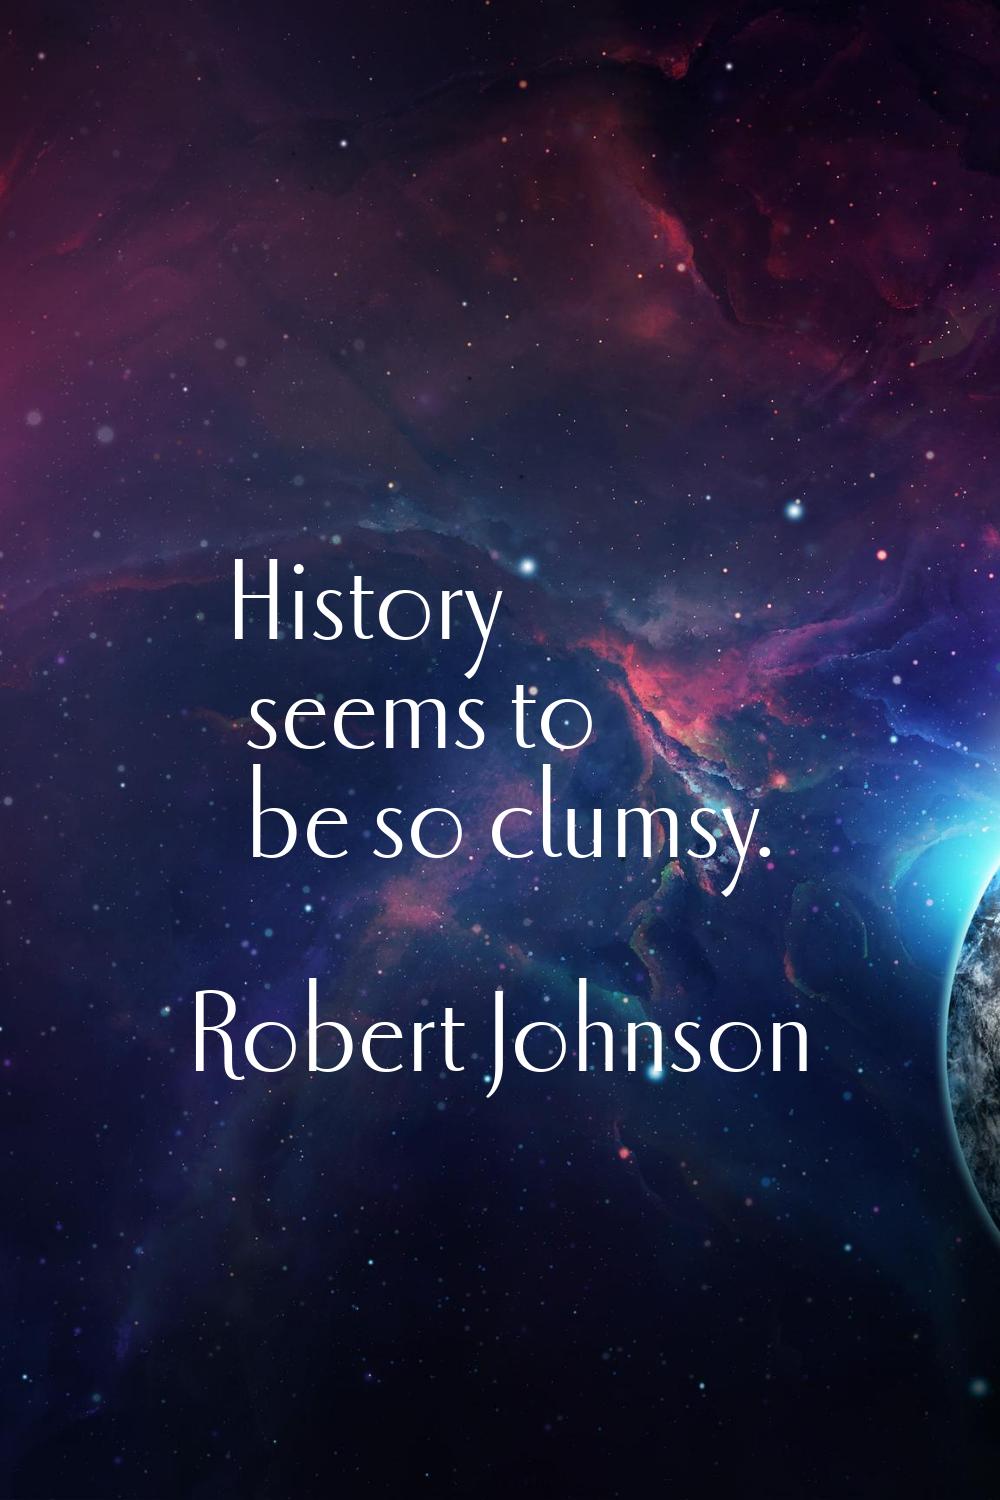 History seems to be so clumsy.